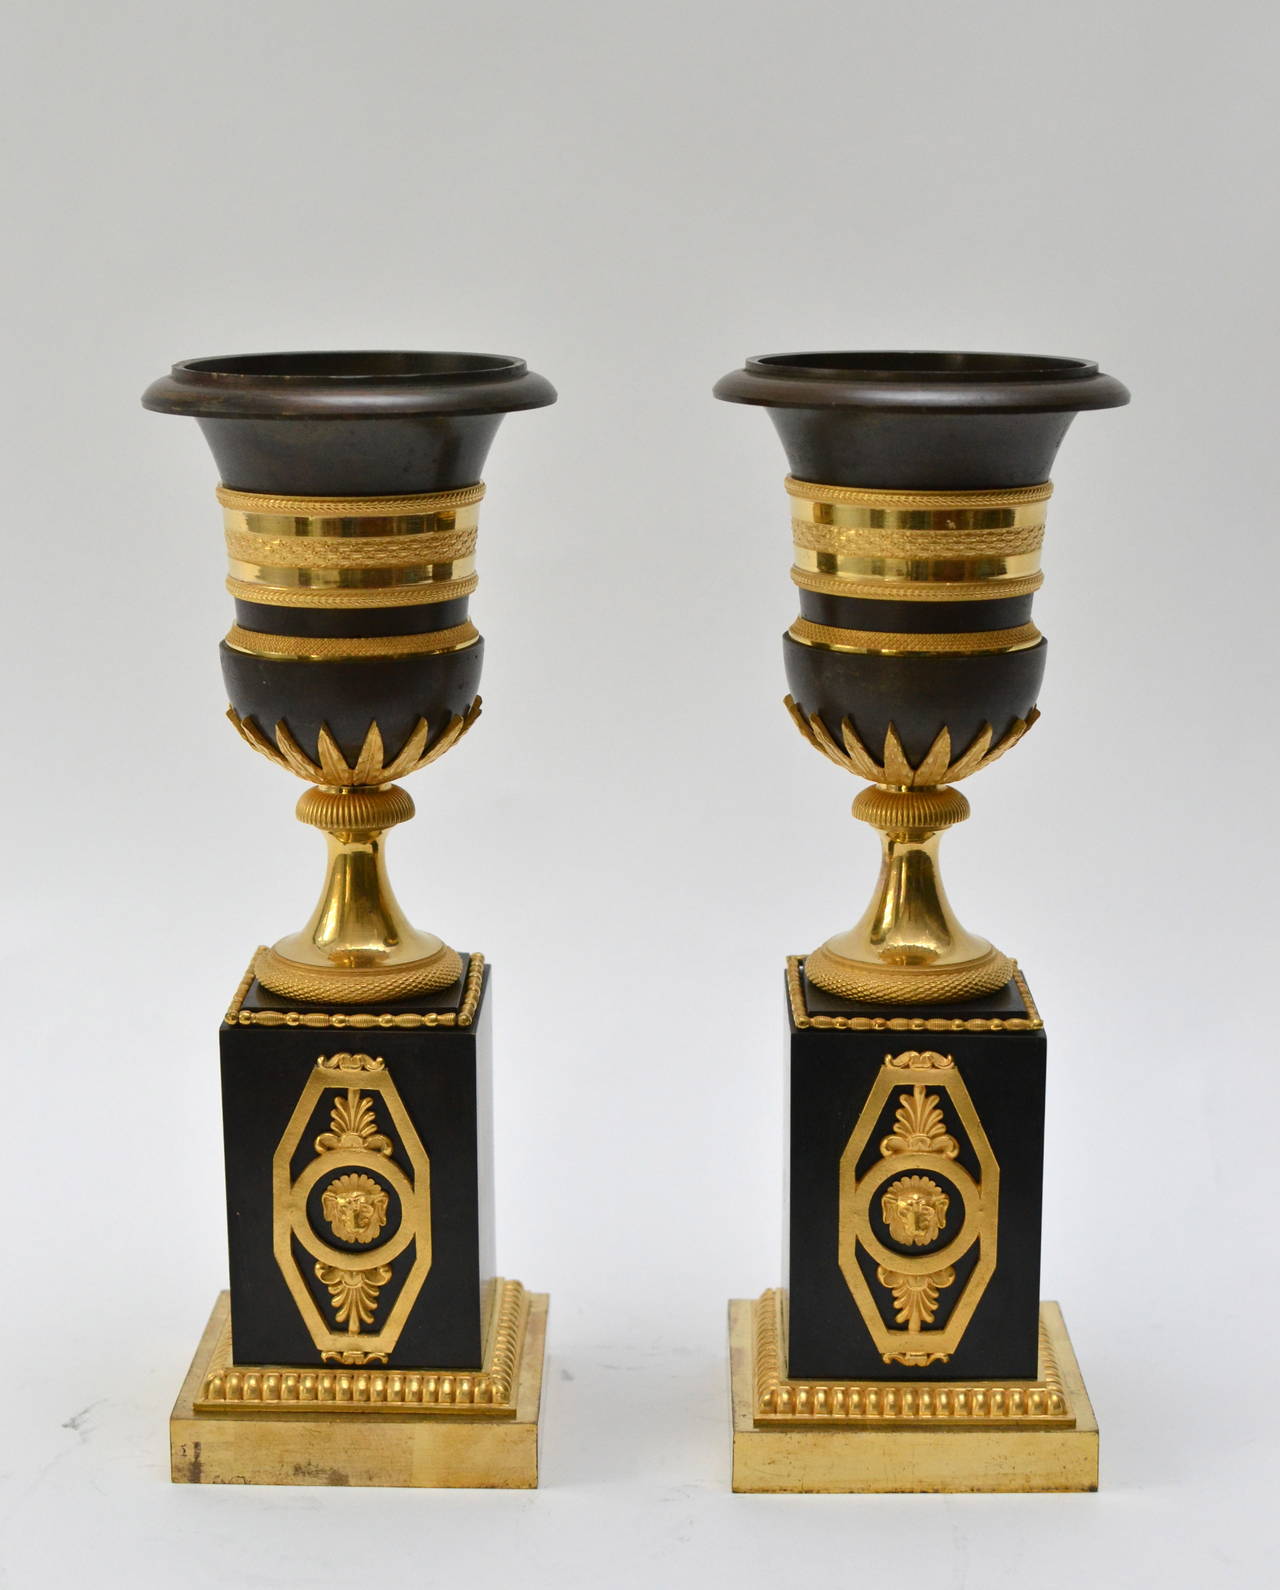 A unusual pair of gilt and patinated bronze Empire urn shaped candlesticks, France, early 19th century.